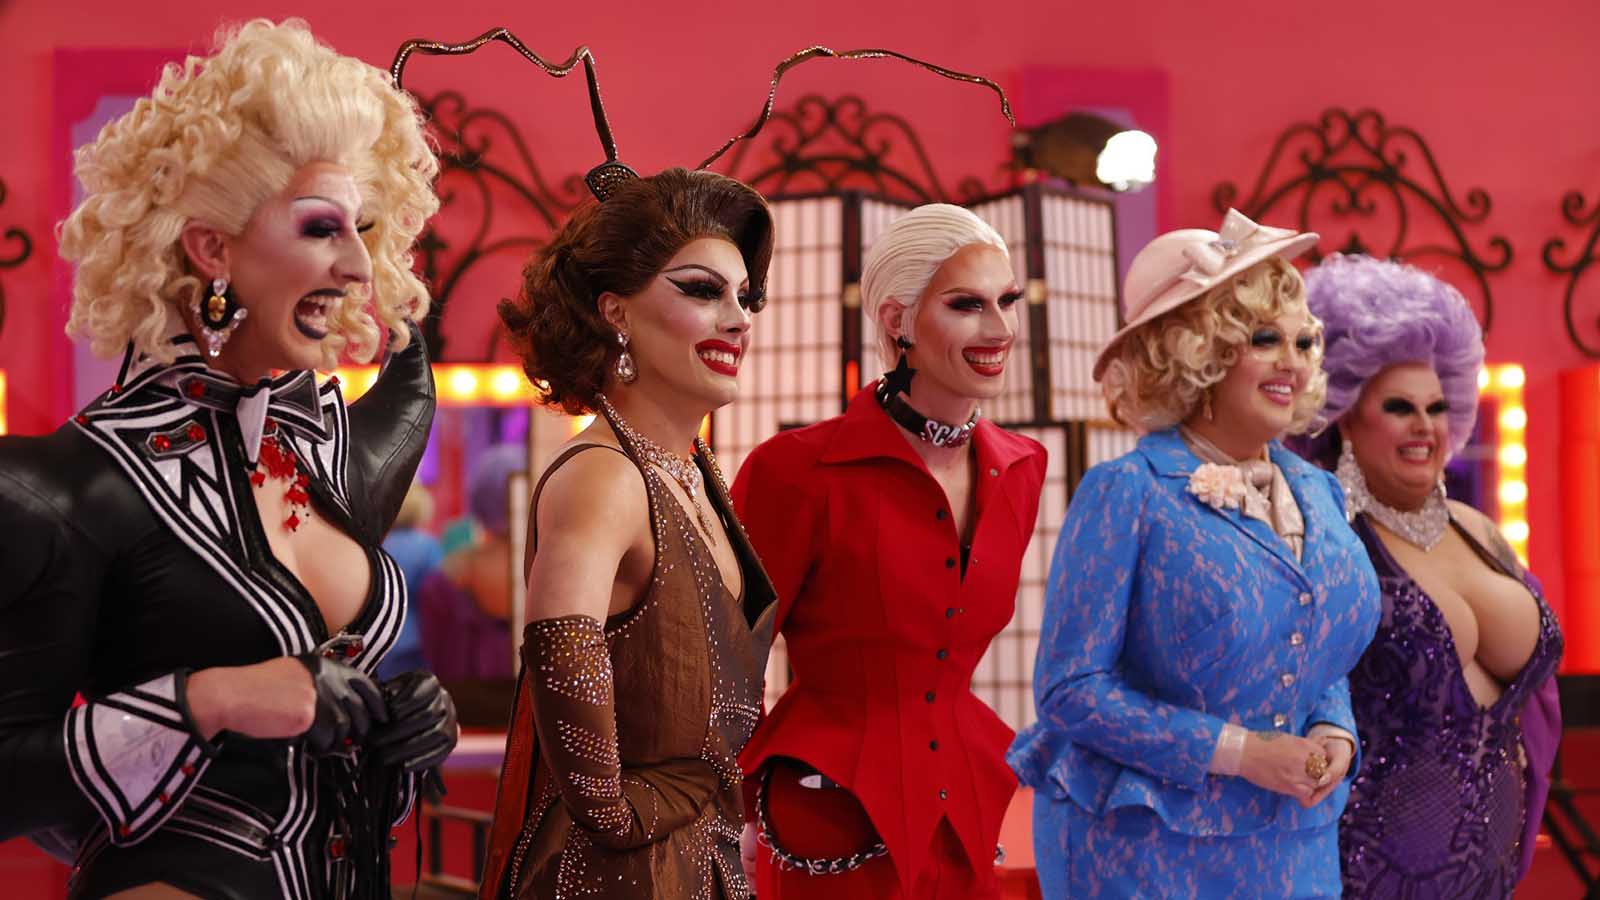 'Drag Race Down Under' is ready to top the charts with "Queens Down Under". But who missed the note? Catch up on all the tea from this week's ep.